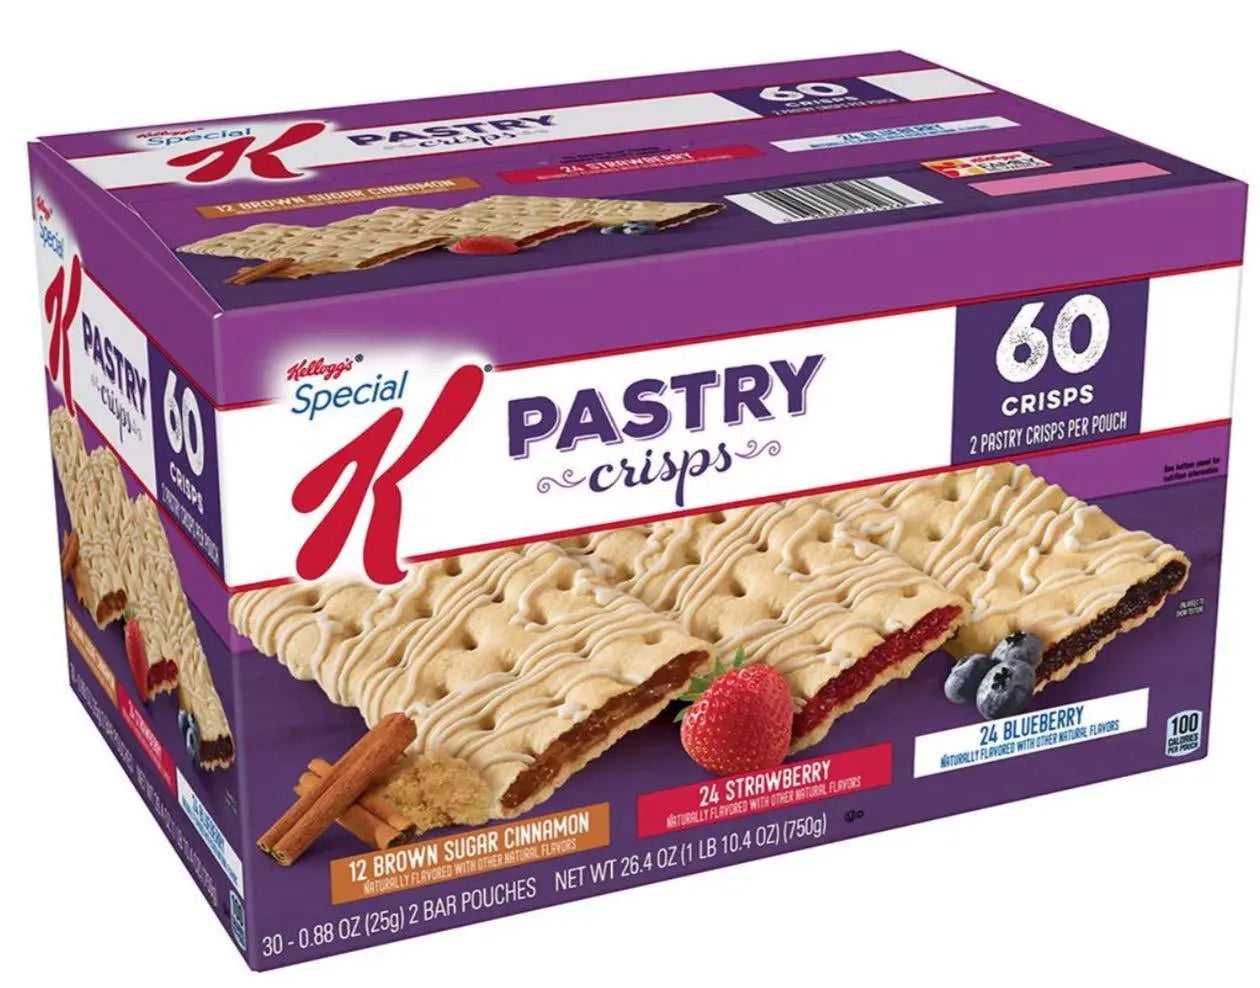 Wholesale prices with free shipping all over United States KEB22526 - Special K Pastry Crisps - Steven Deals